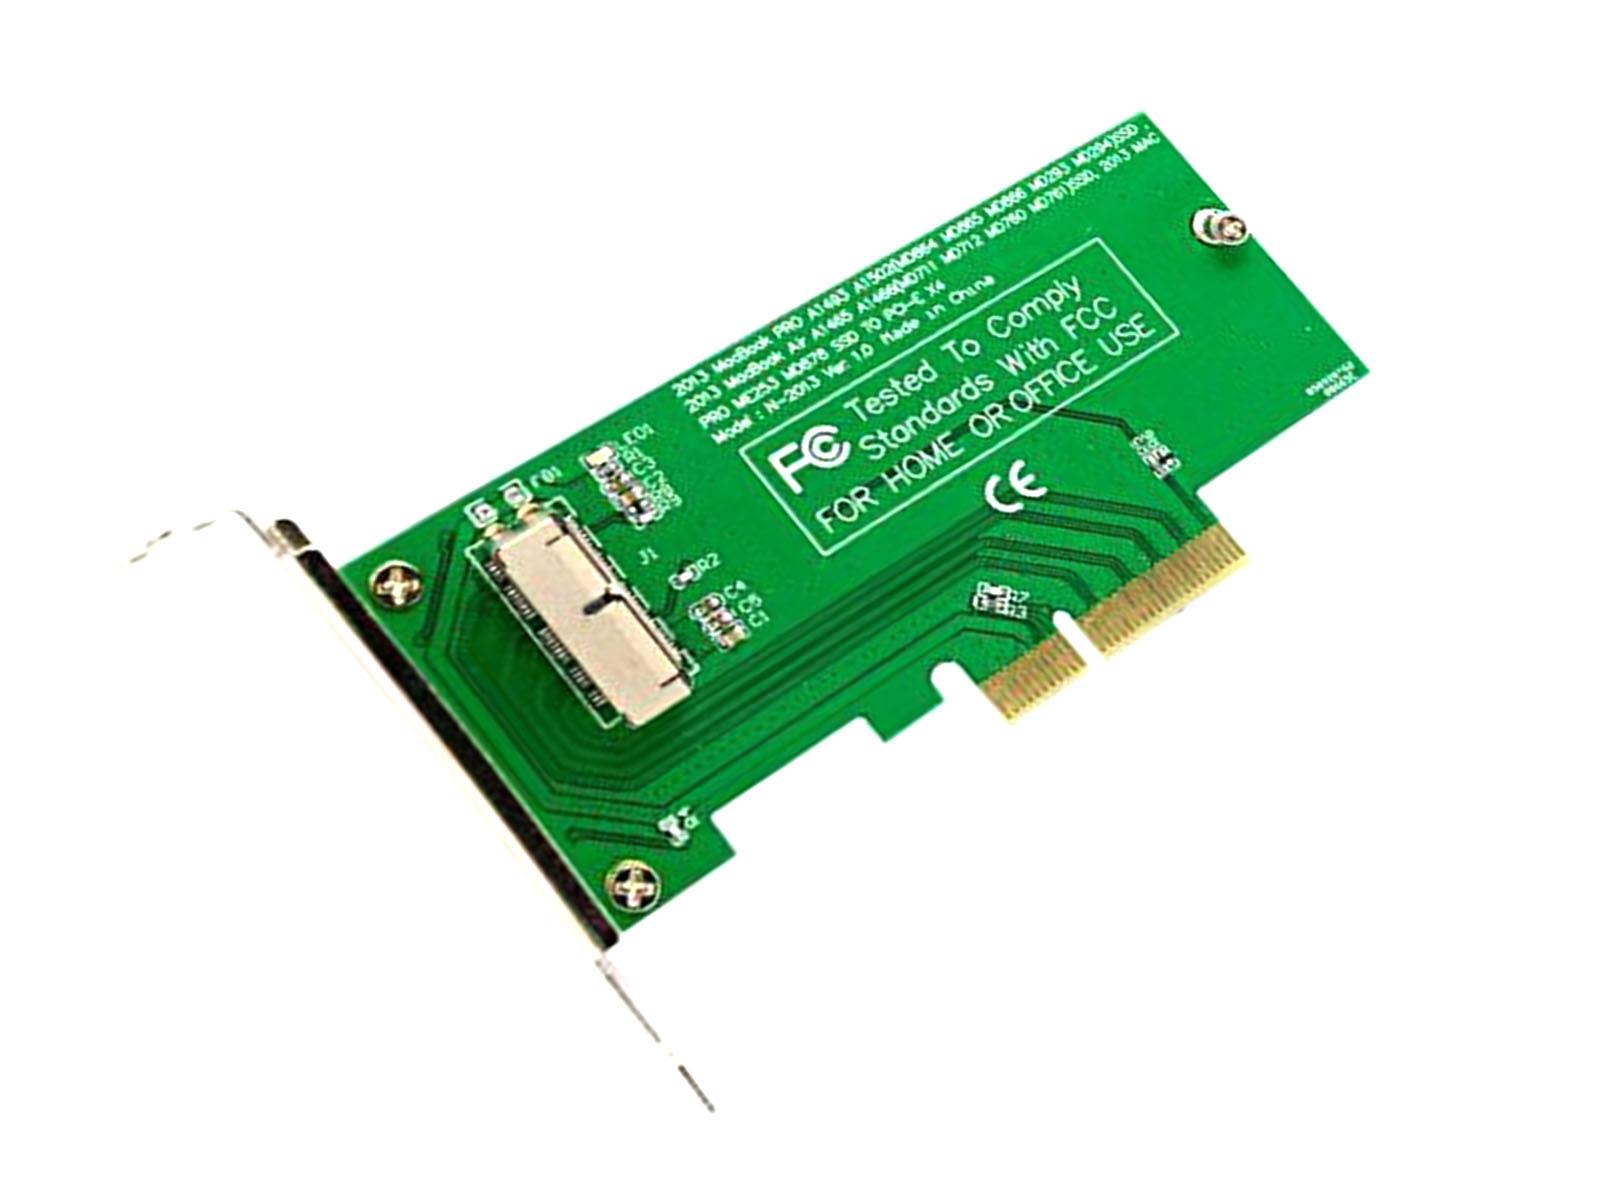 Apple 2013 to PCI-e Adapter